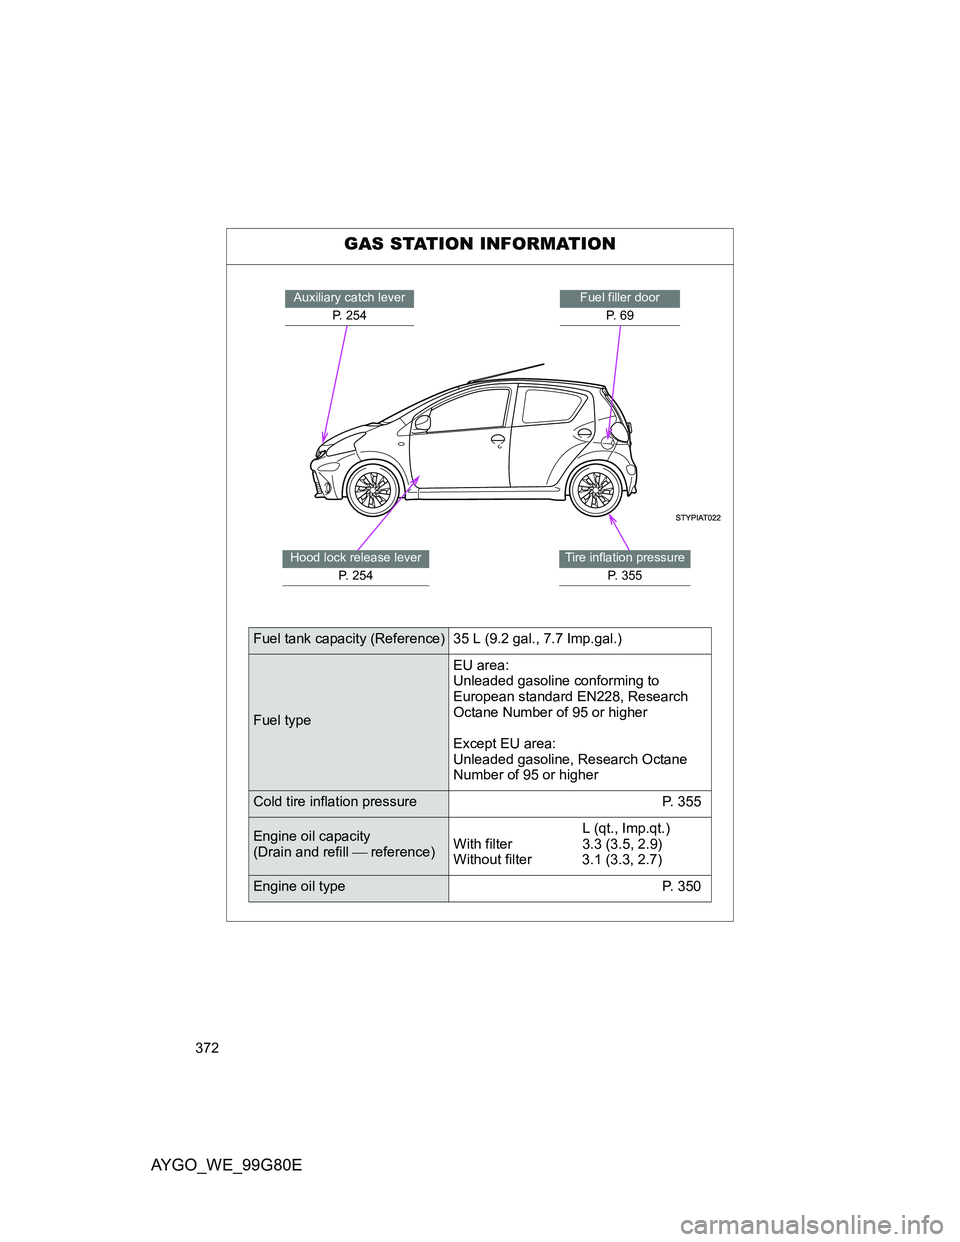 TOYOTA AYGO 2013  Owners Manual (in English) 372
AYGO_WE_99G80E
GAS STATION INFORMATION
Auxiliary catch lever
P. 254Fuel filler door
P.  6 9
Hood lock release lever
P. 254Tire inflation pressure
P. 355
Fuel tank capacity (Reference) 35 L (9.2 ga